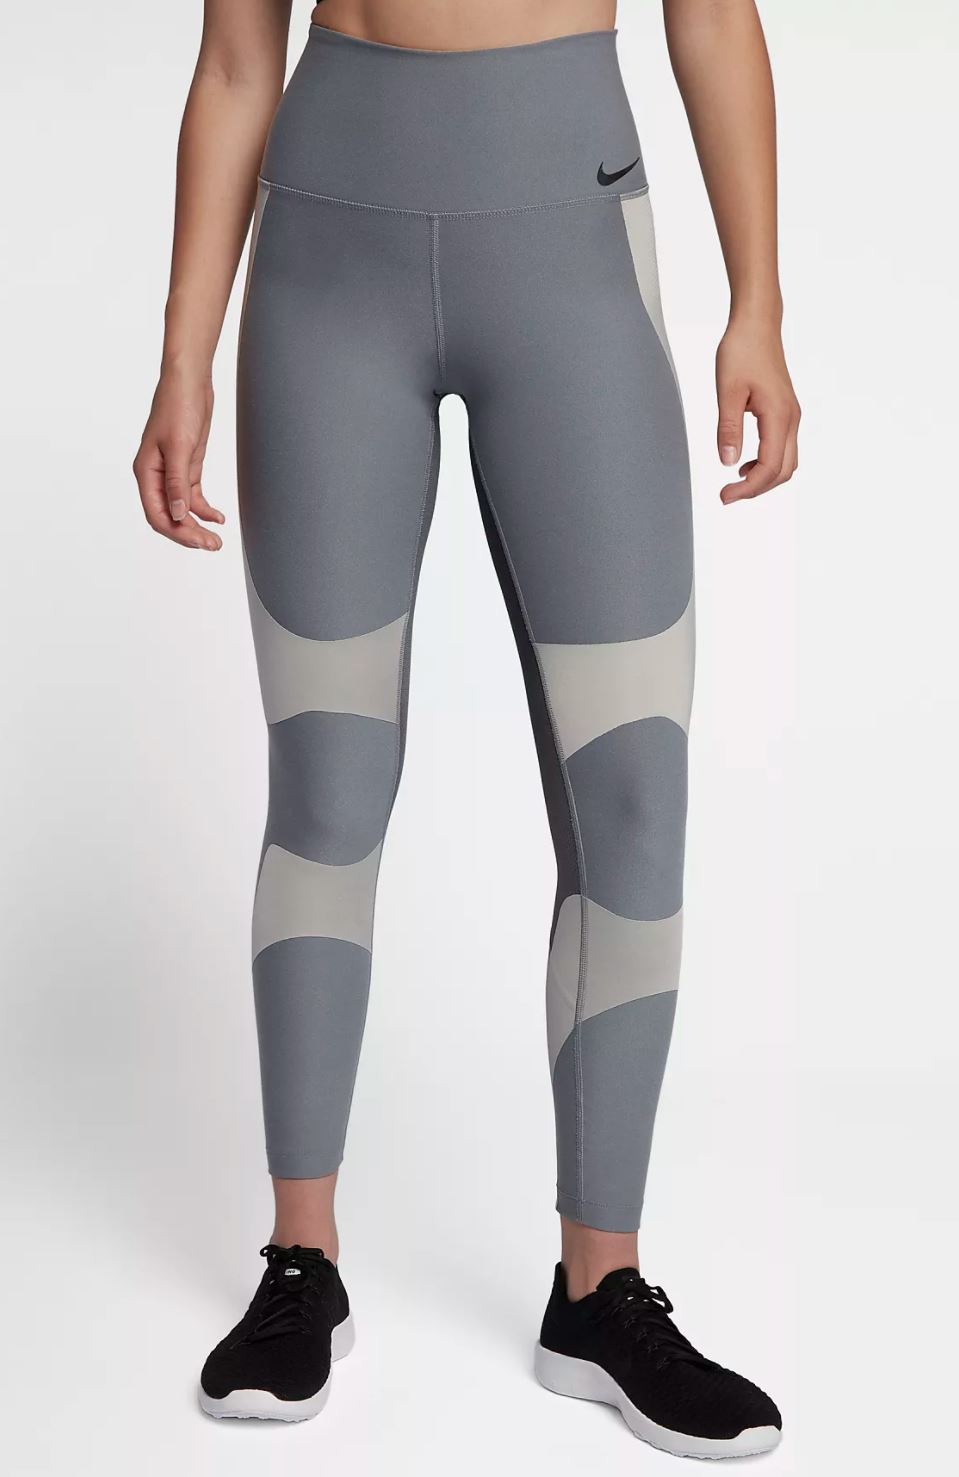 6 Pairs of Perfect High Waisted Gym Leggings for Active Women